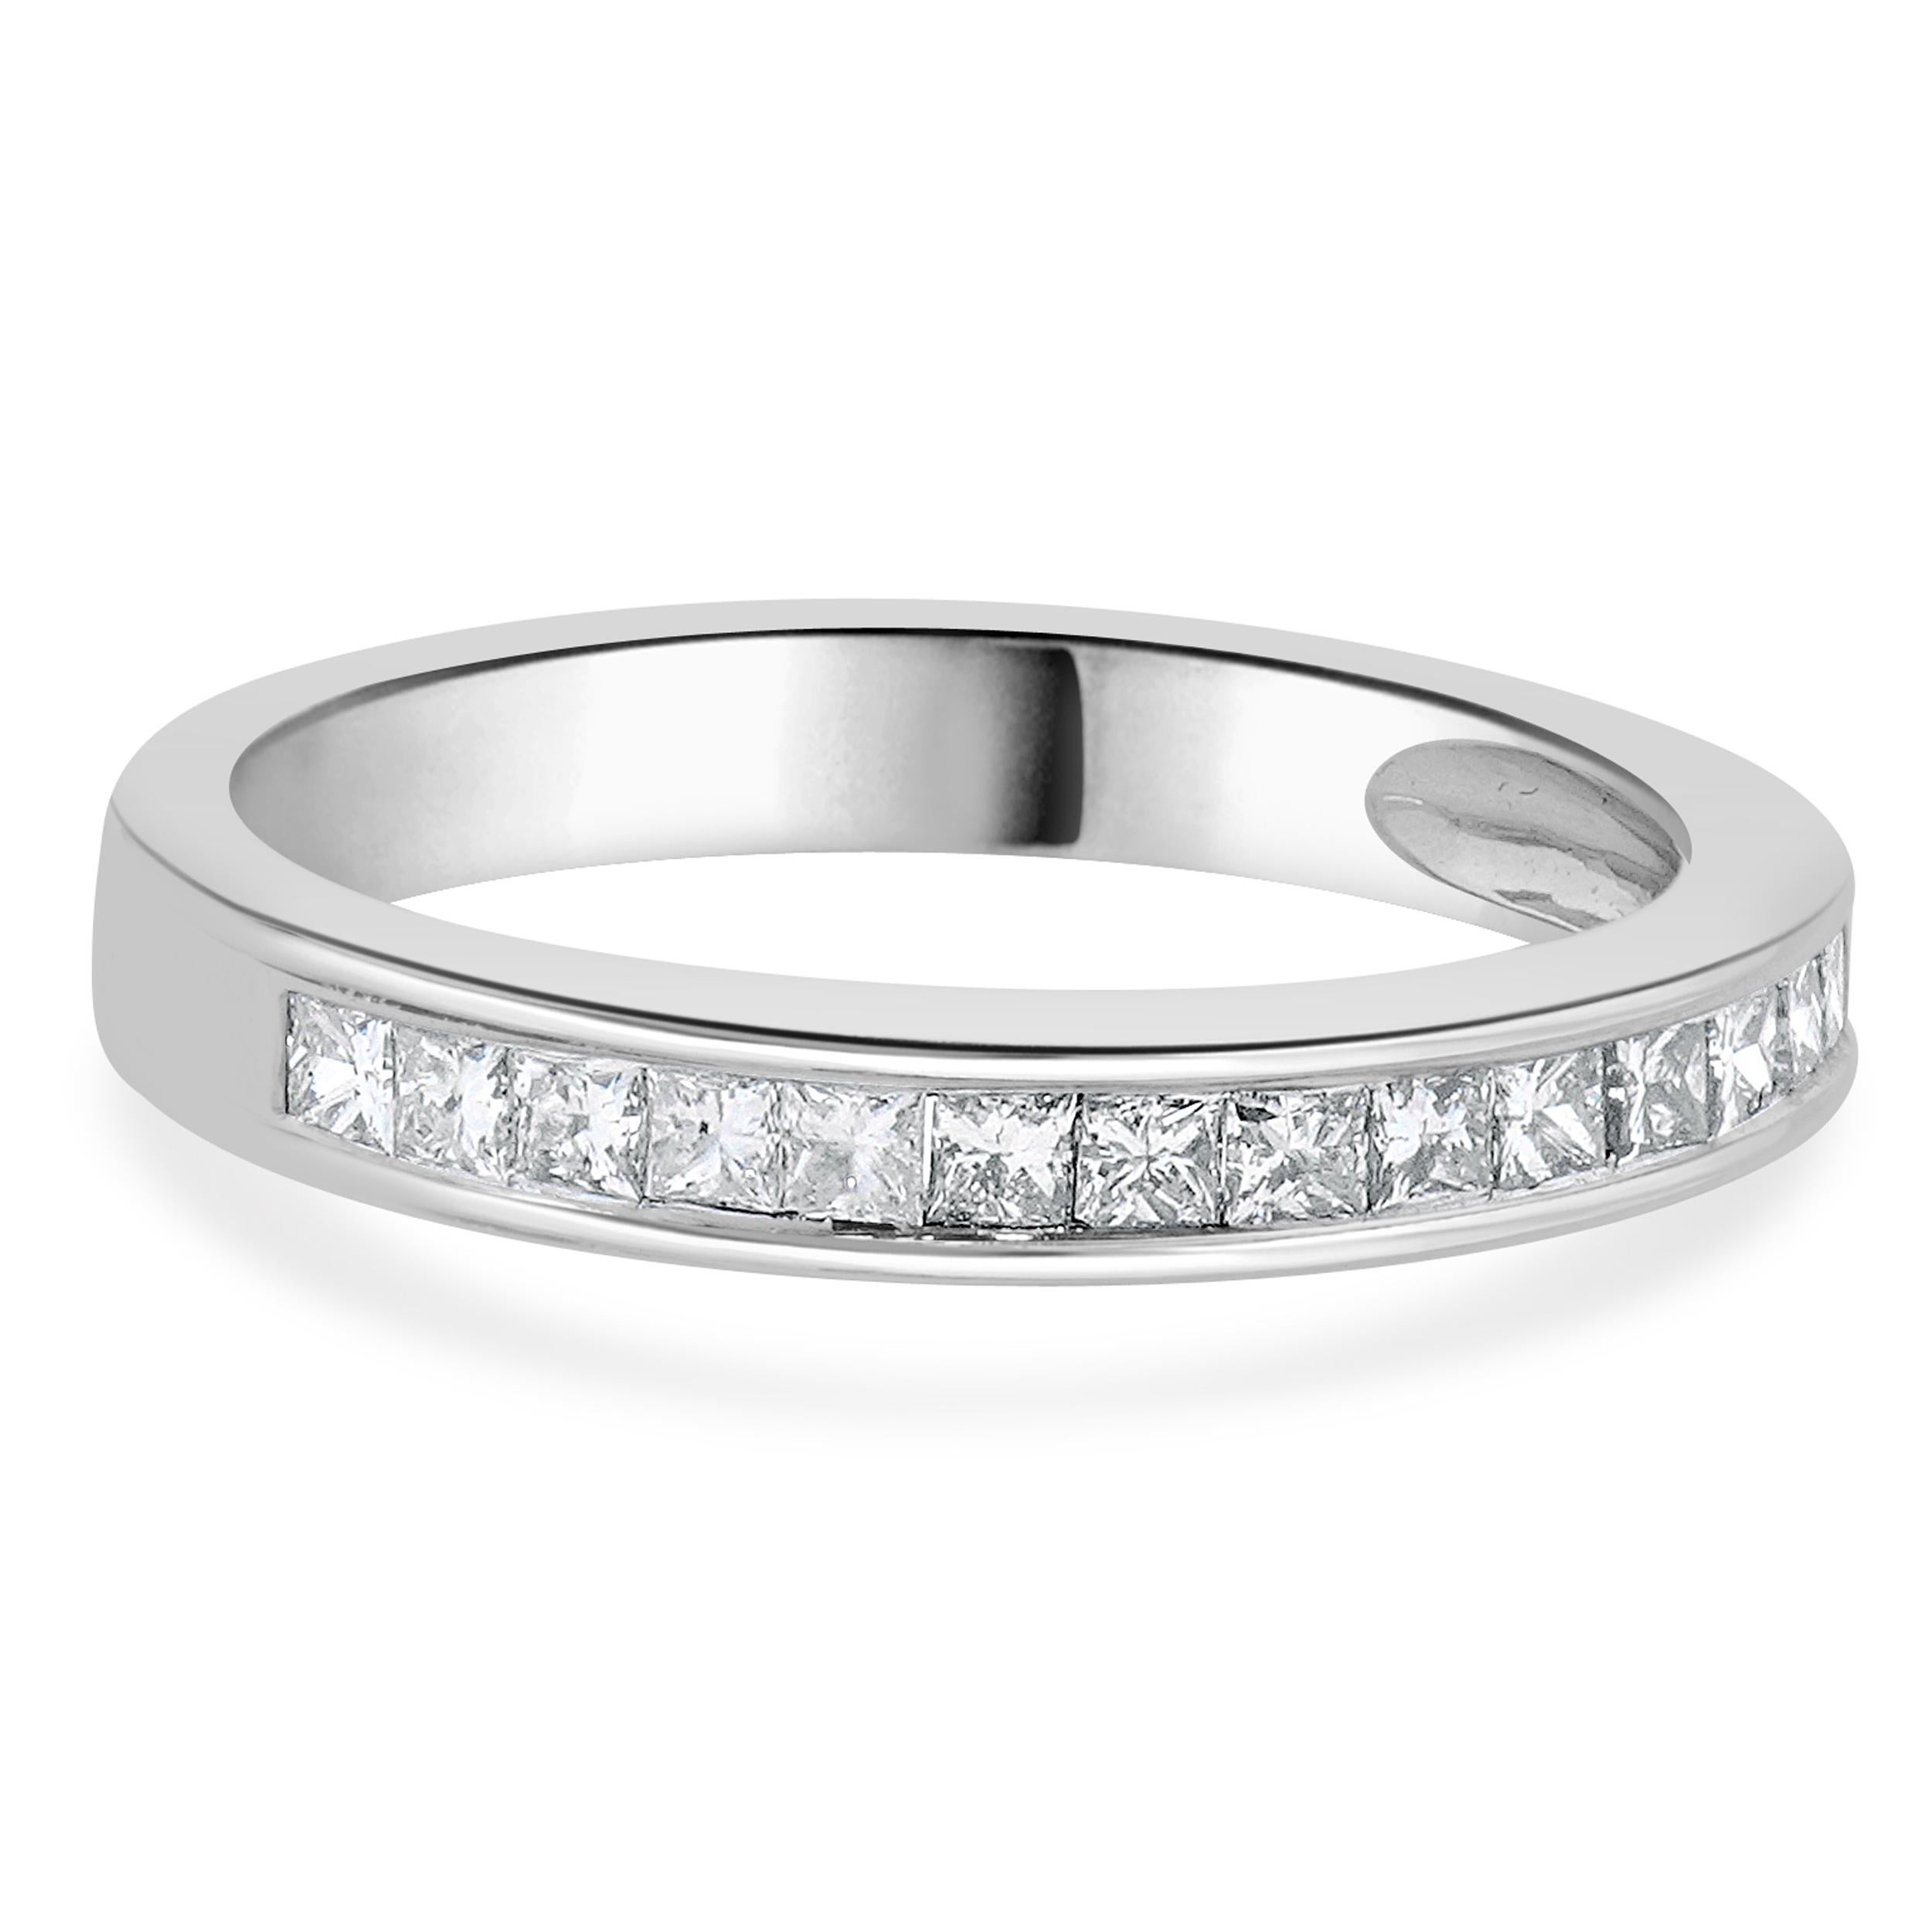 Designer: Custom
Material: 14K white gold
Diamonds: 16 princess cut = 0.56cttw
Color: H
Clarity: SI1-2
Size: 7 sizing available 
Dimensions: ring top measures 3.1mm in width
Weight: 3.20 grams
